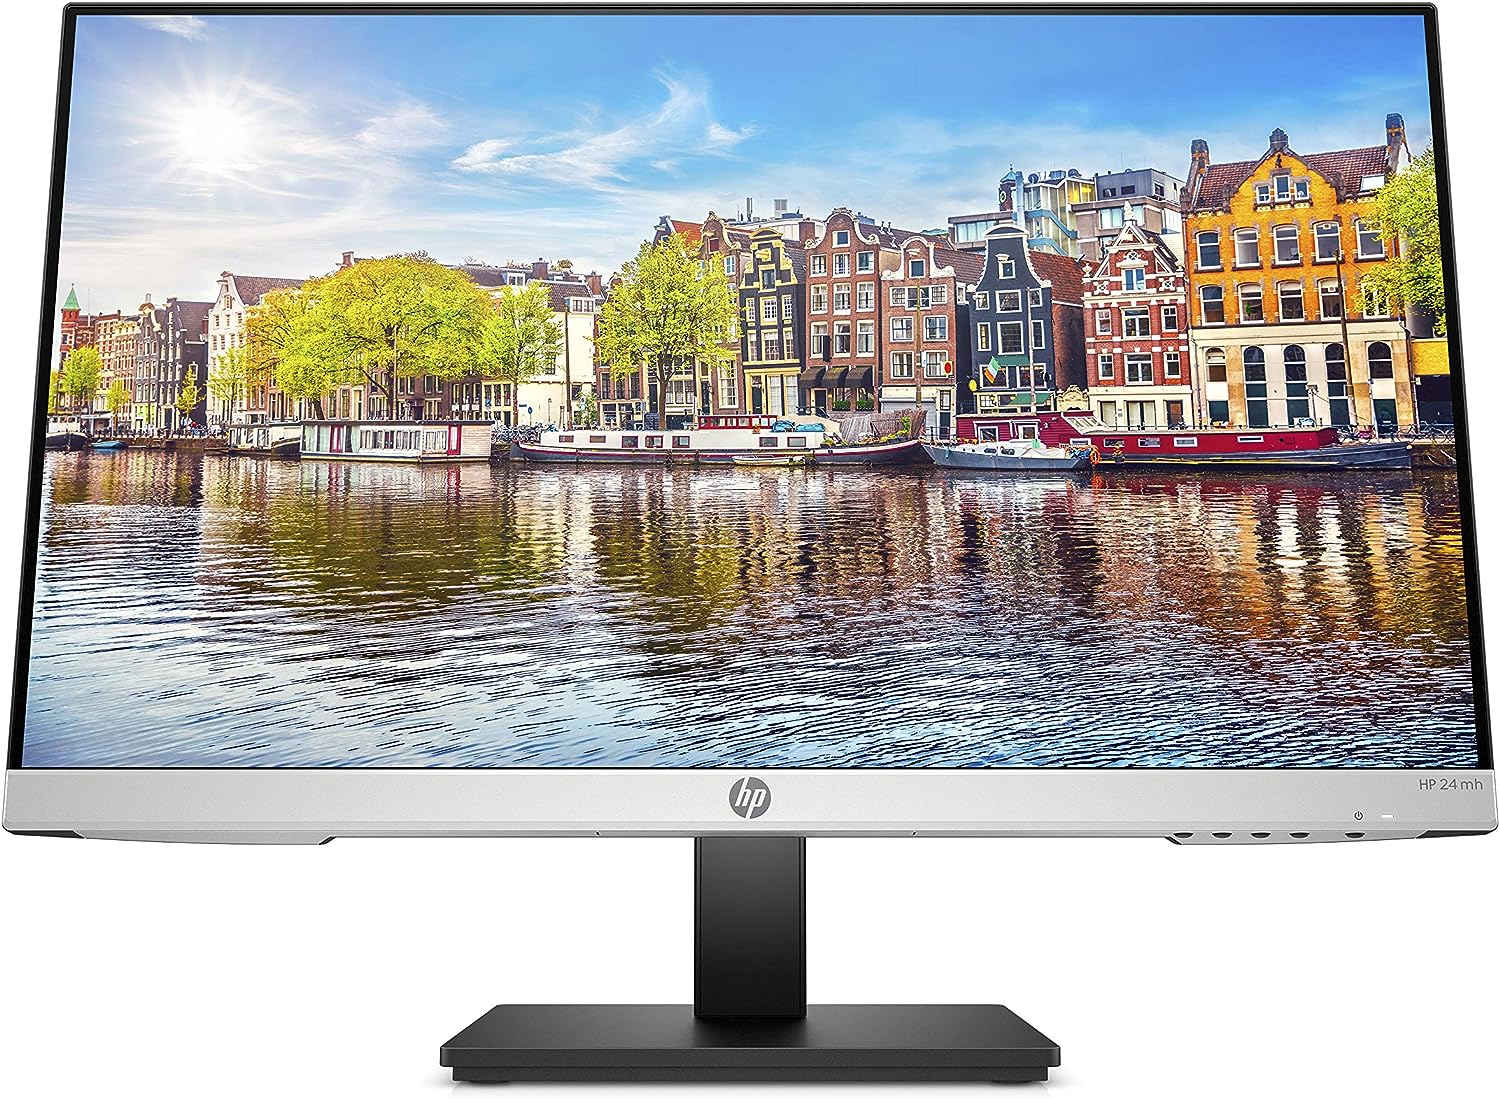 HP 24mh FHD Monitor - Computer Monitor with 23.8-Inch [...]